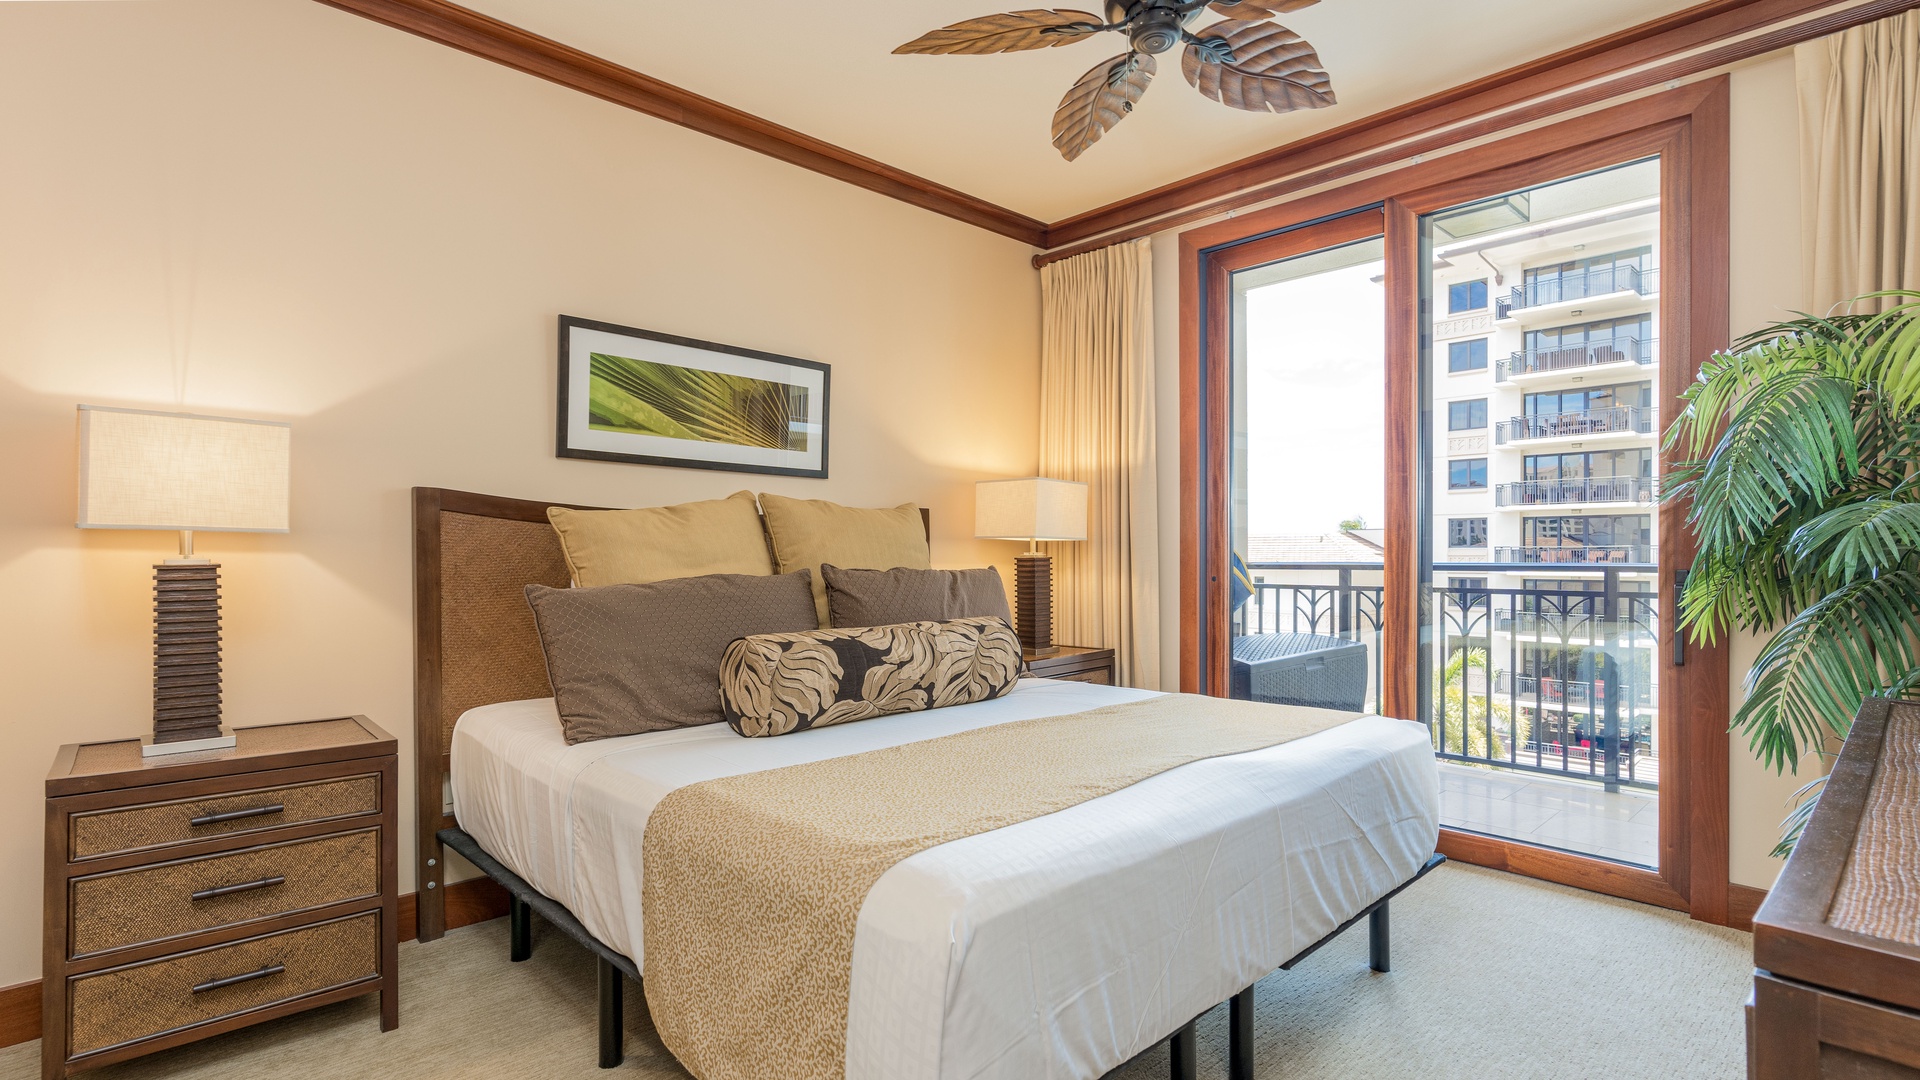 Kapolei Vacation Rentals, Ko Olina Beach Villas O521 - The primary guest bedroom for a restful night of sleep on a king bed.